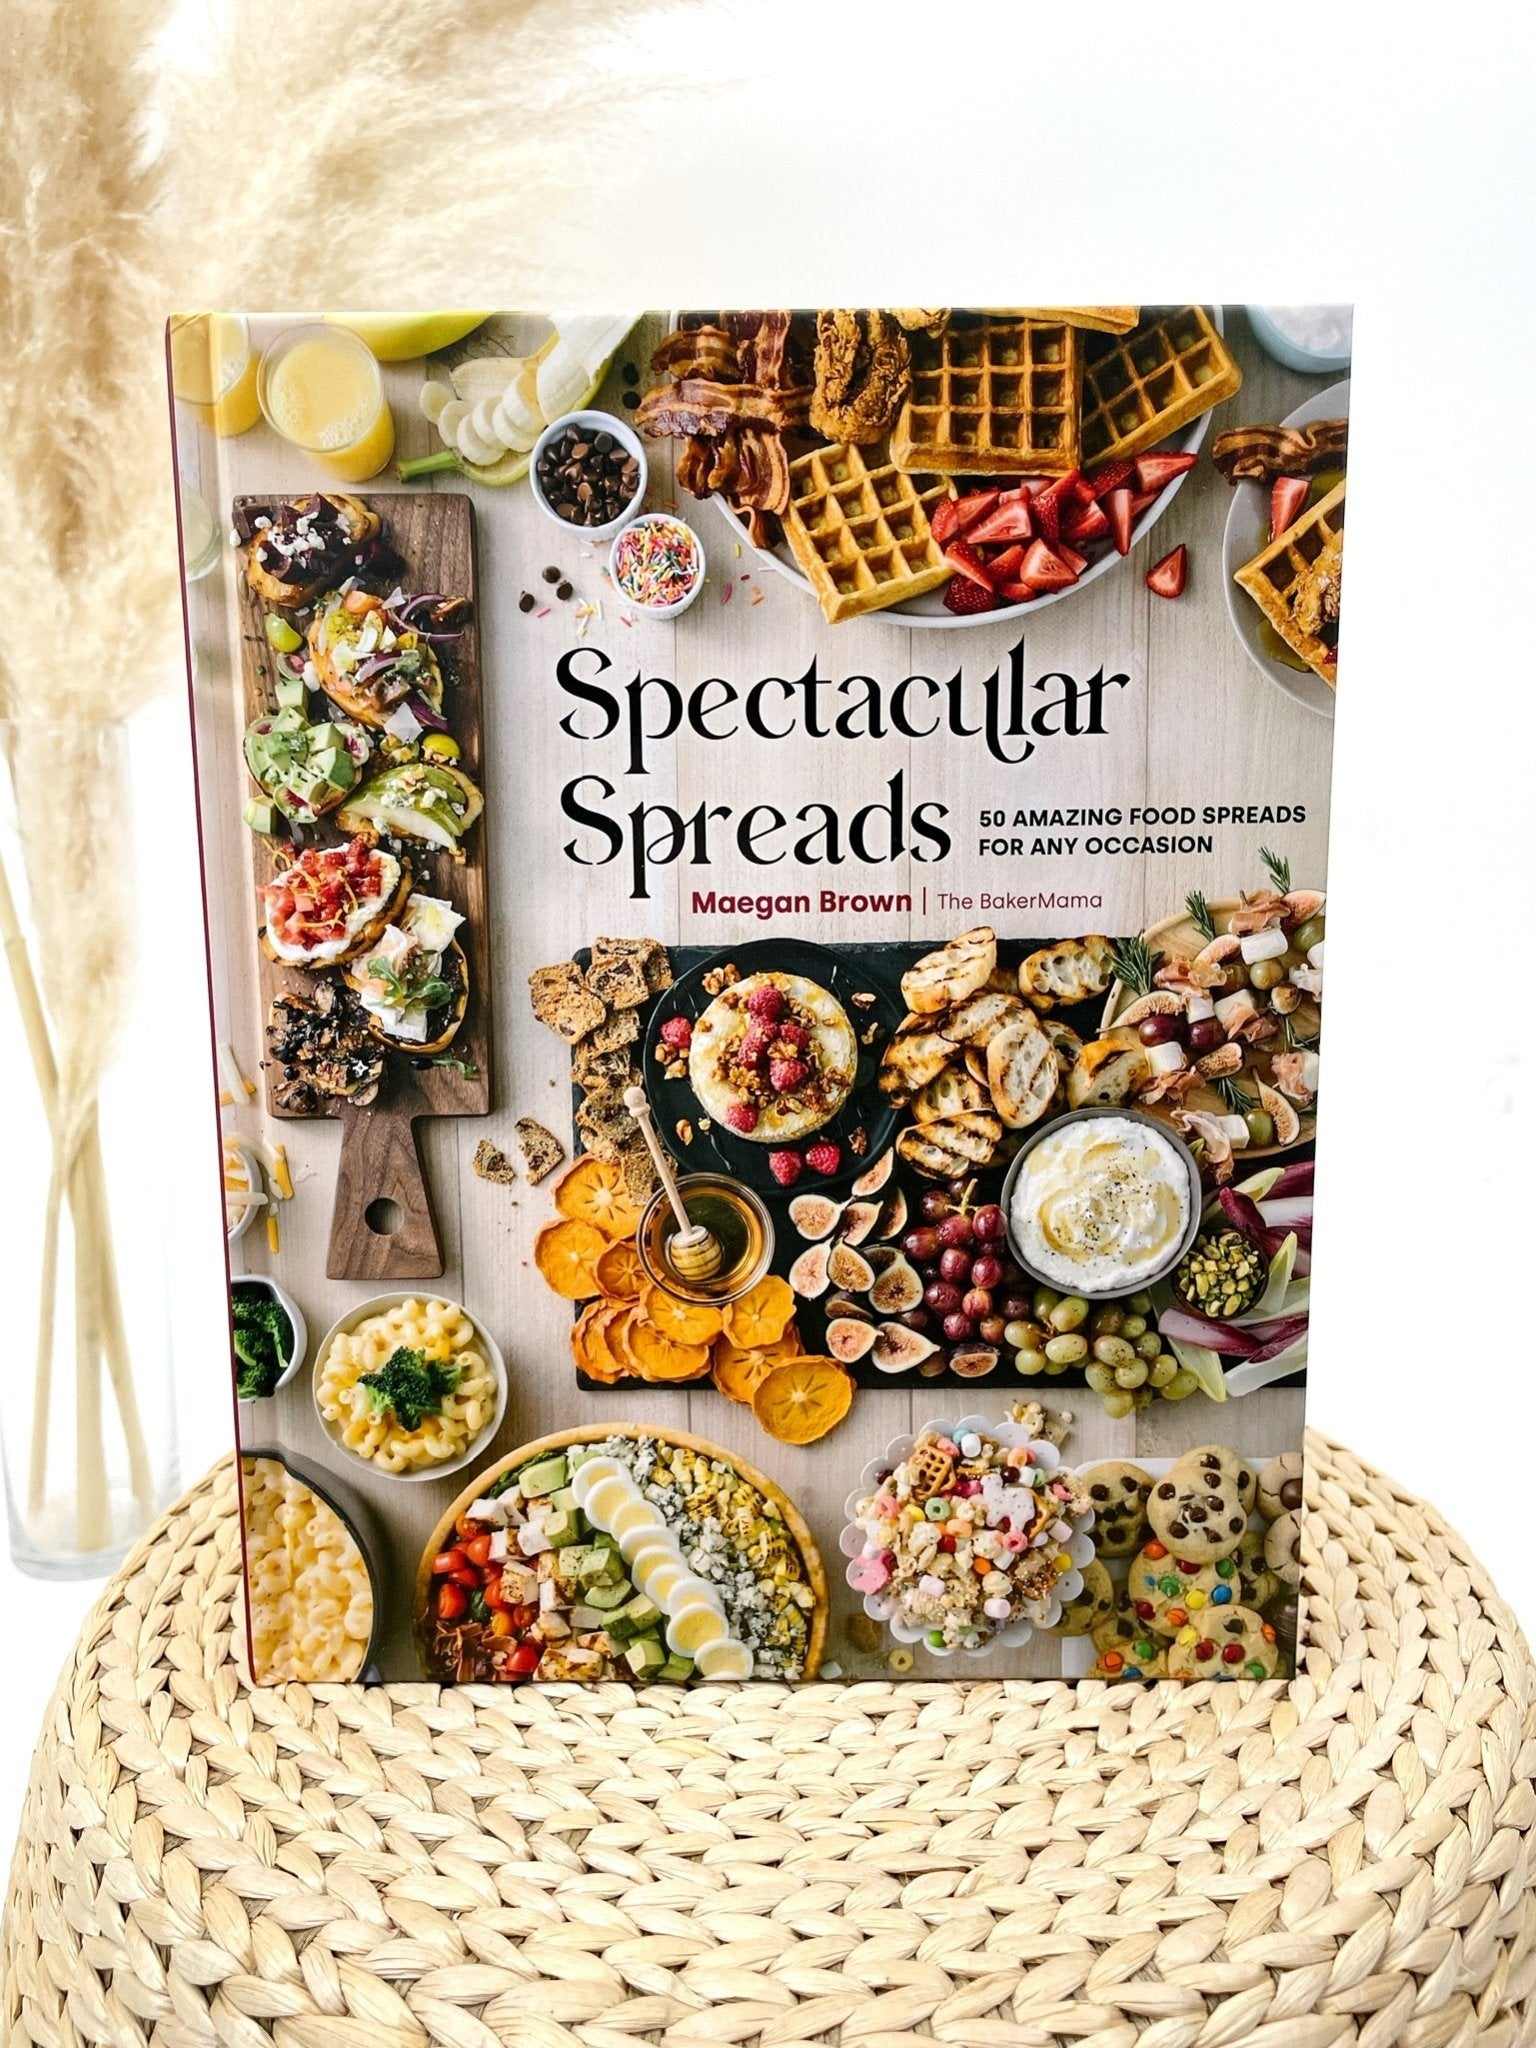 Spectacular Spreads cook book - Stylish book - Trendy Gifts for Mom at Lush Fashion Lounge in Oklahoma